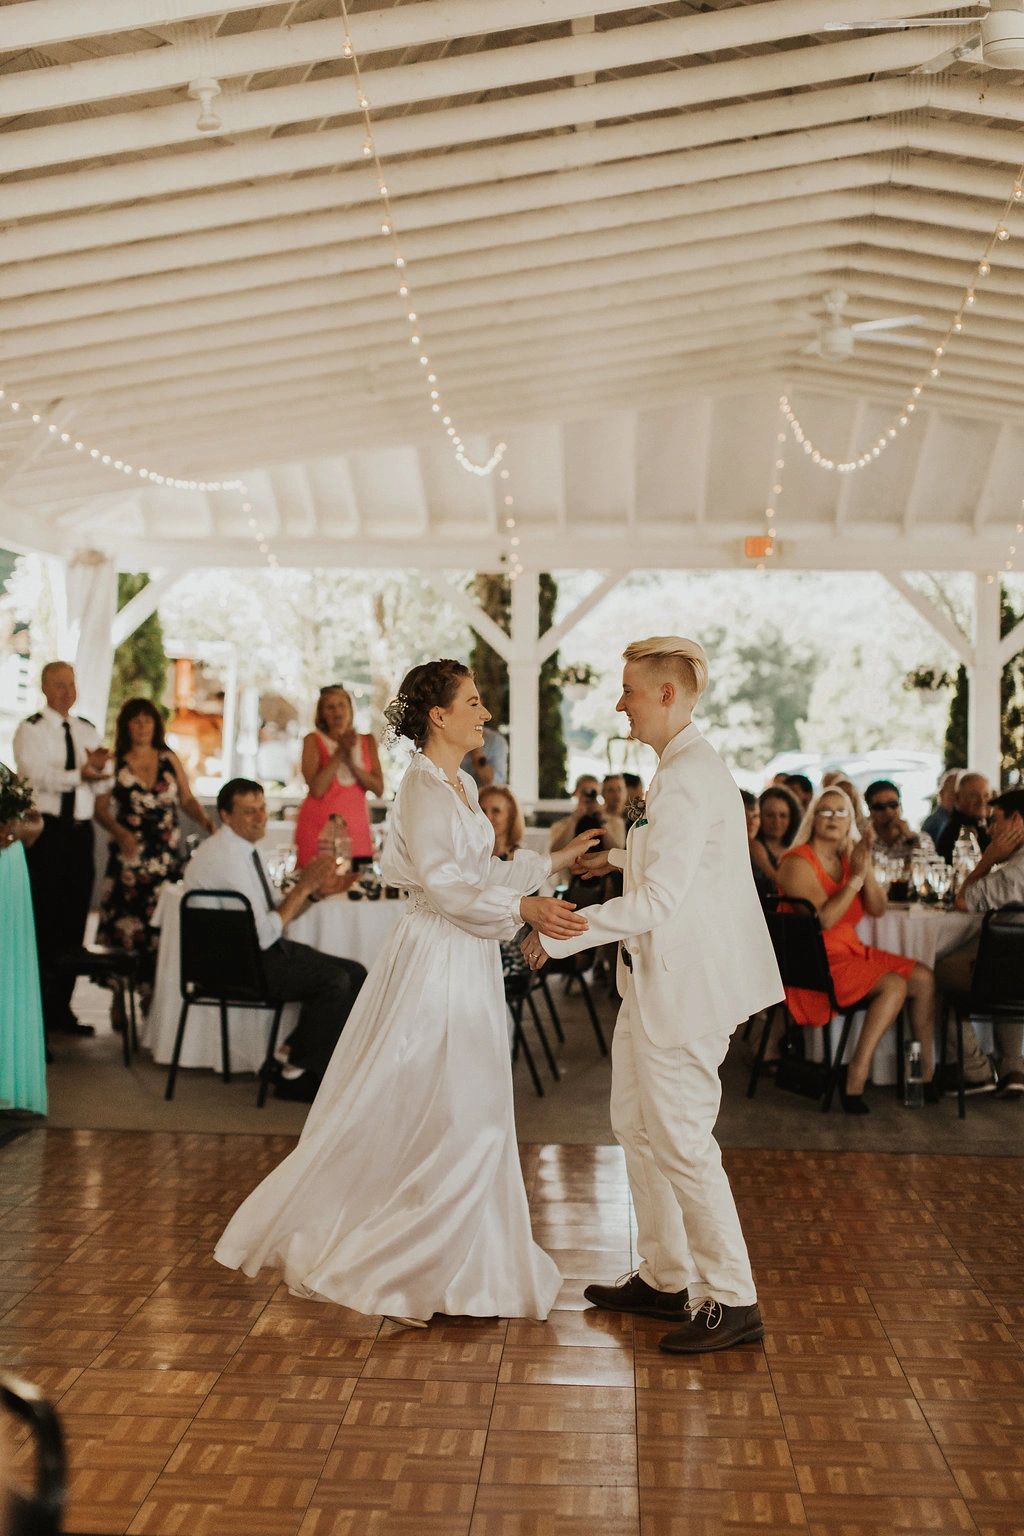 Couple dancing together at wedding reception